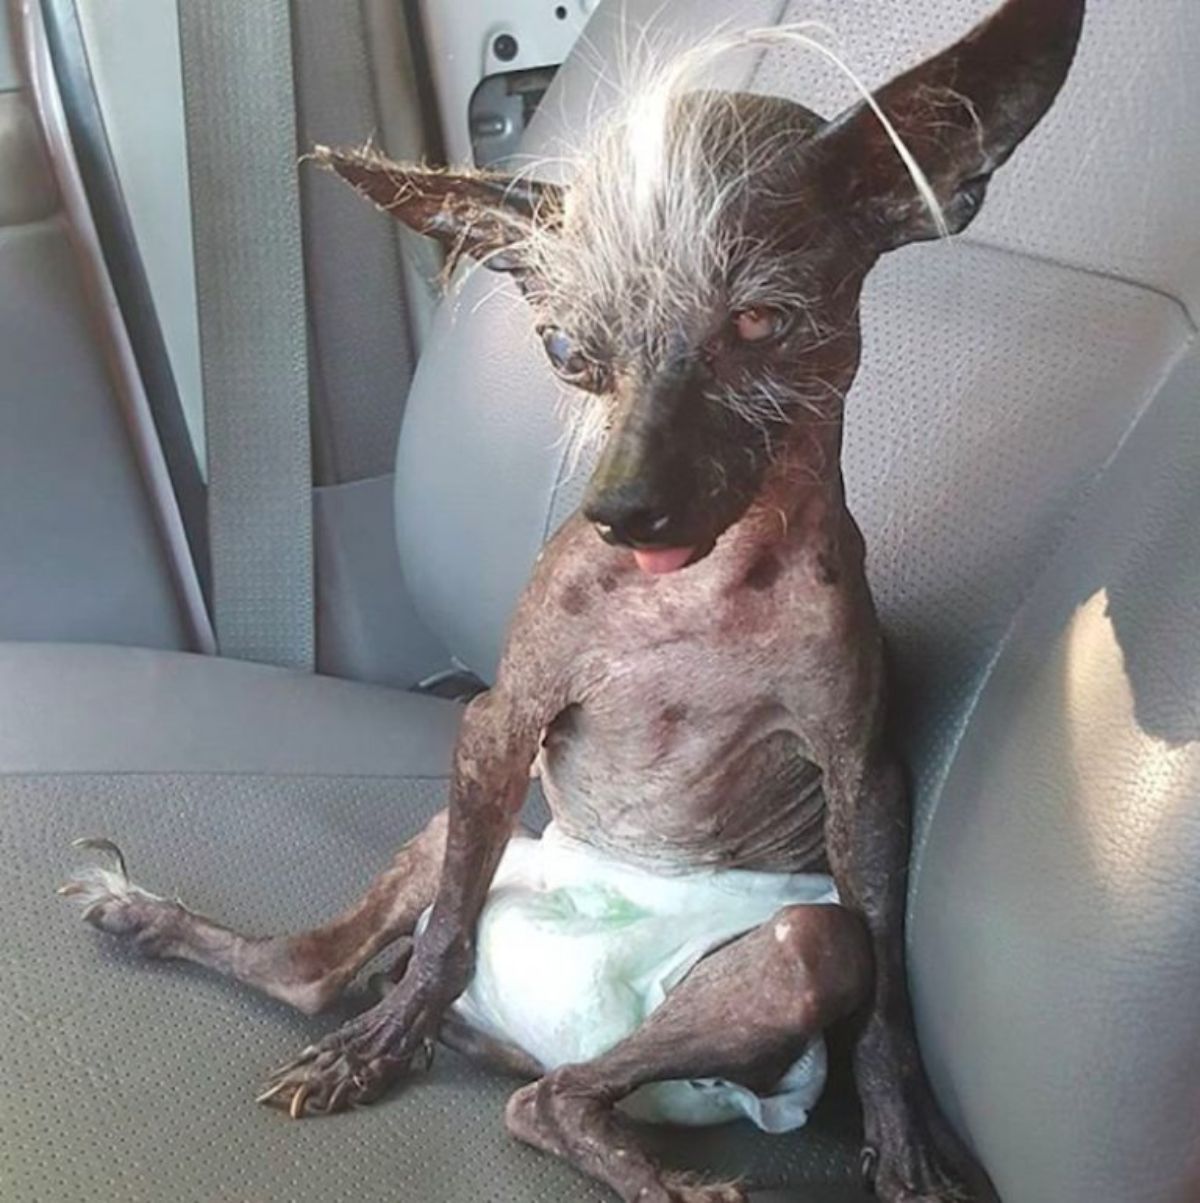 brown hairless dog with white tufts of fur on the forehead sitting on a grey car seat wearing a green diaper